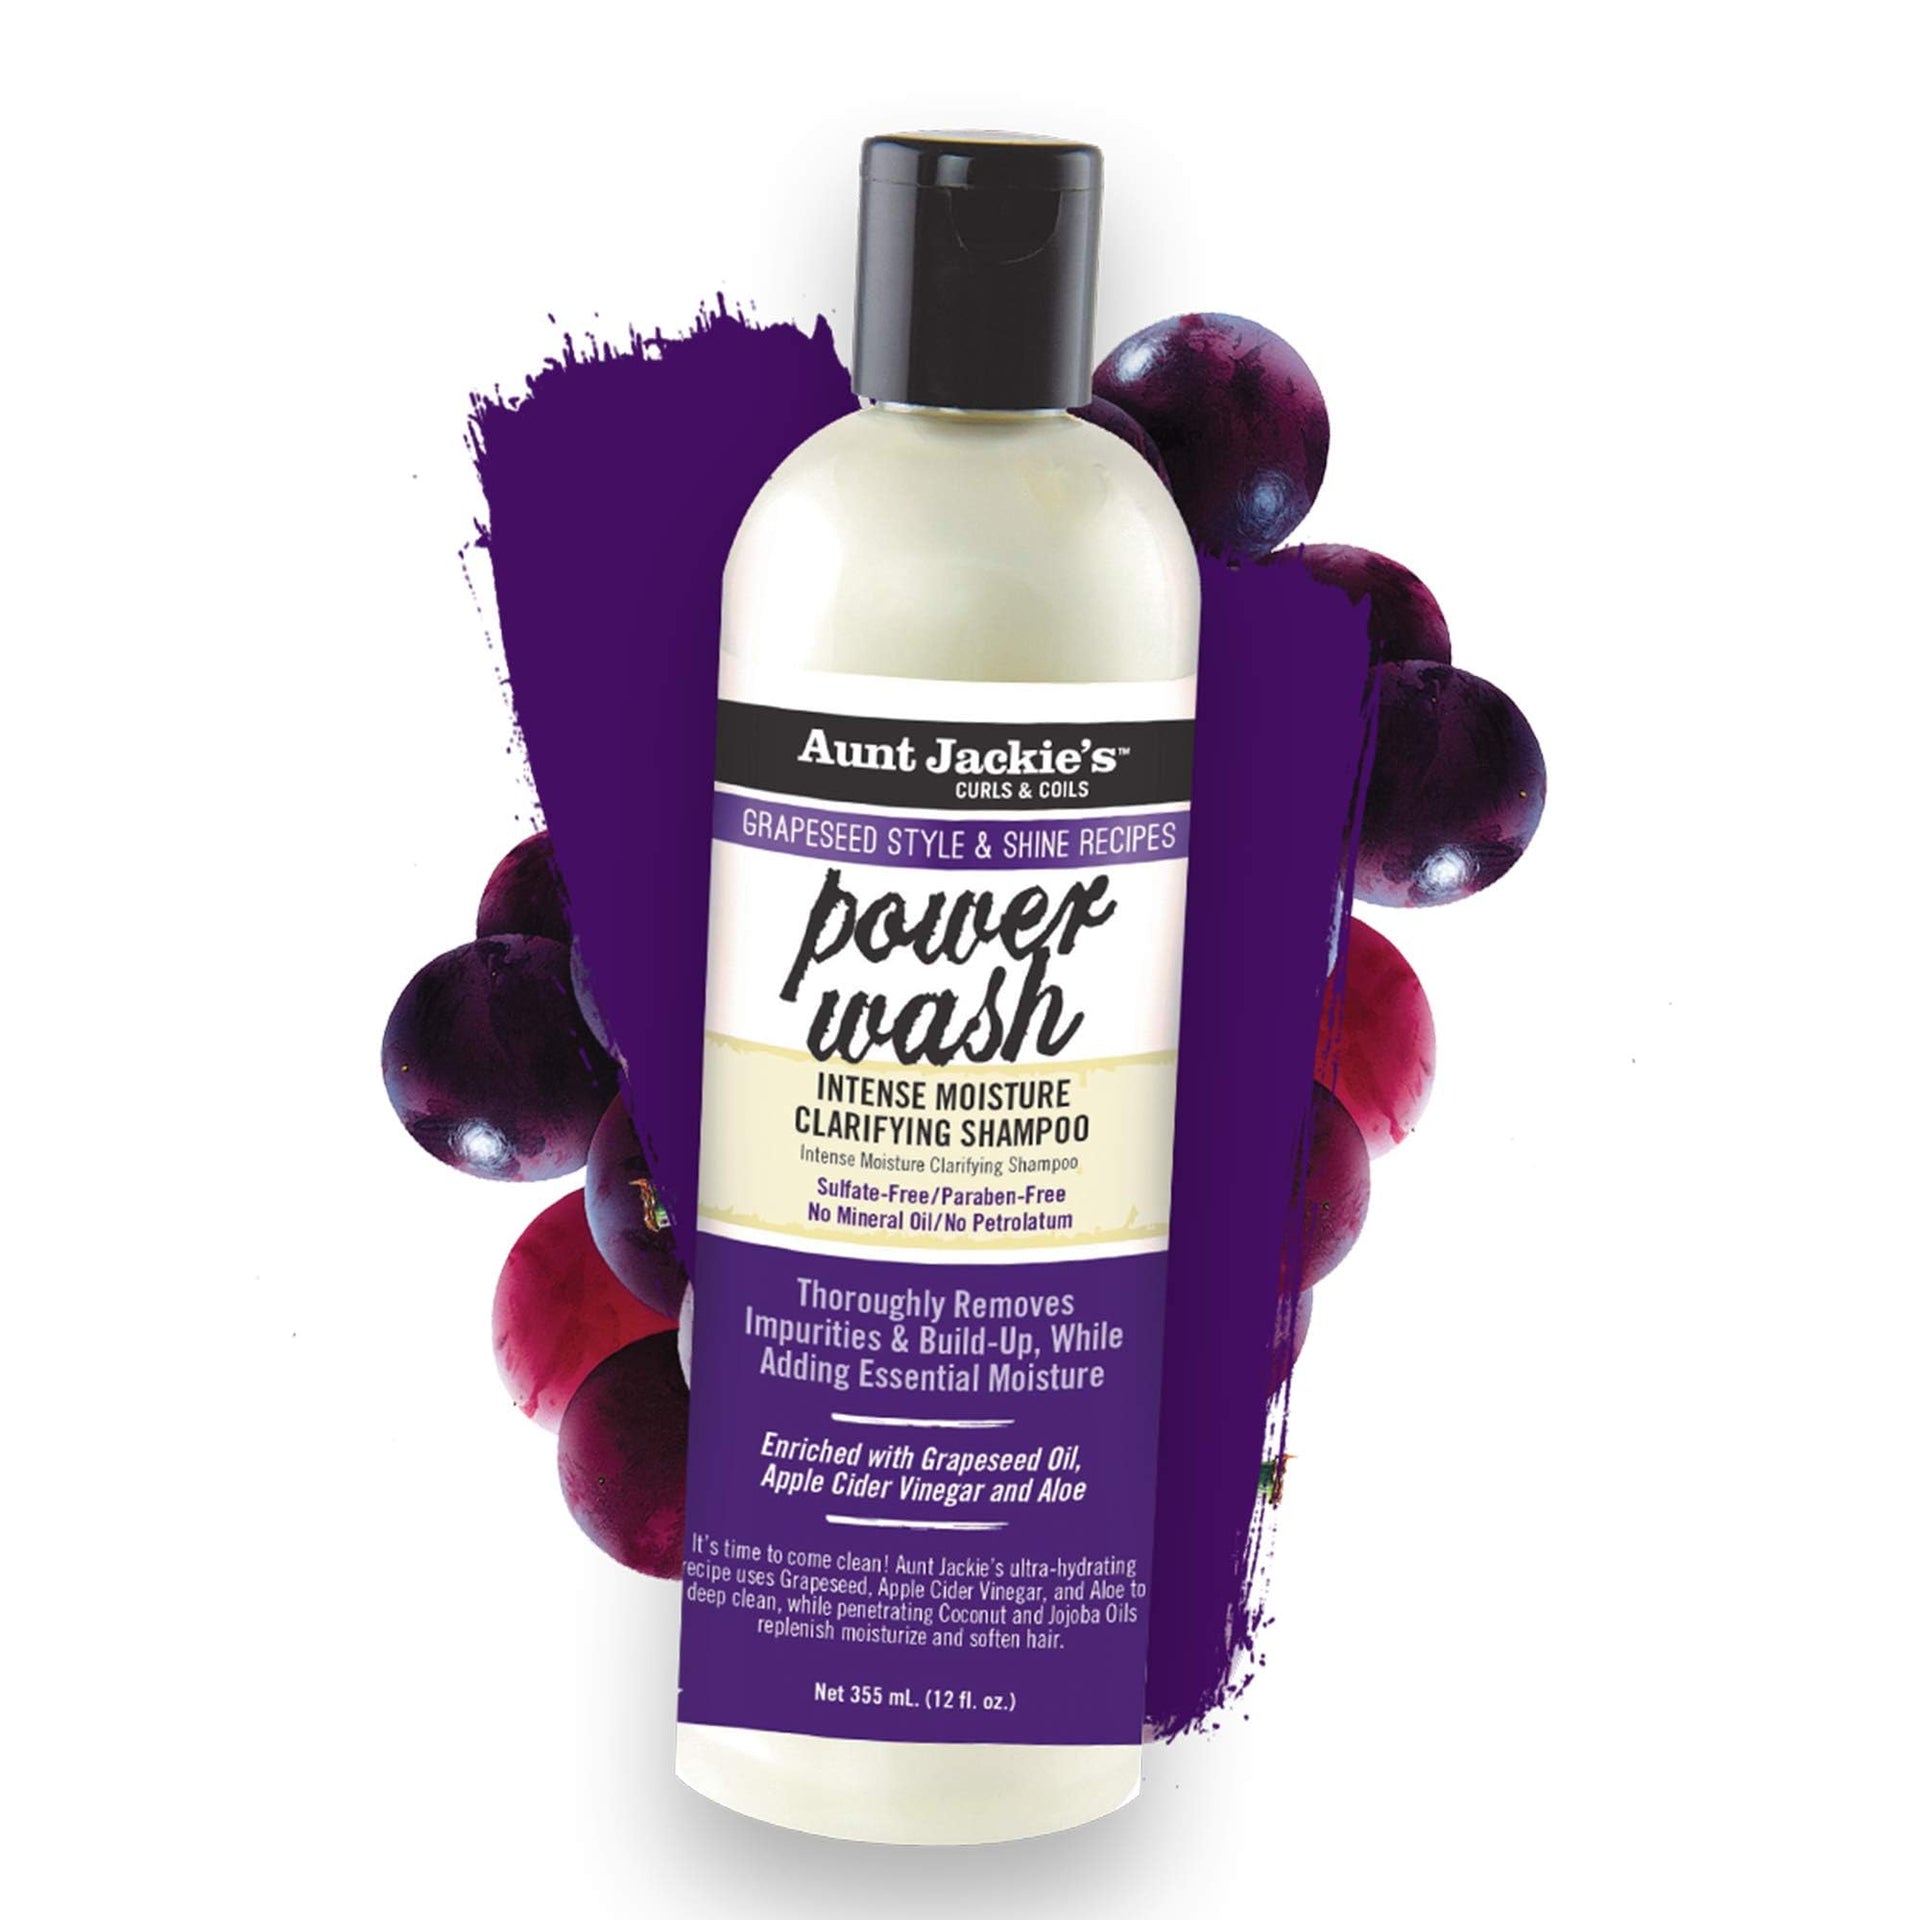 Aunt Jackie's Grapeseed Style and Shine Power Wash Clarifying Shampoo 355ml